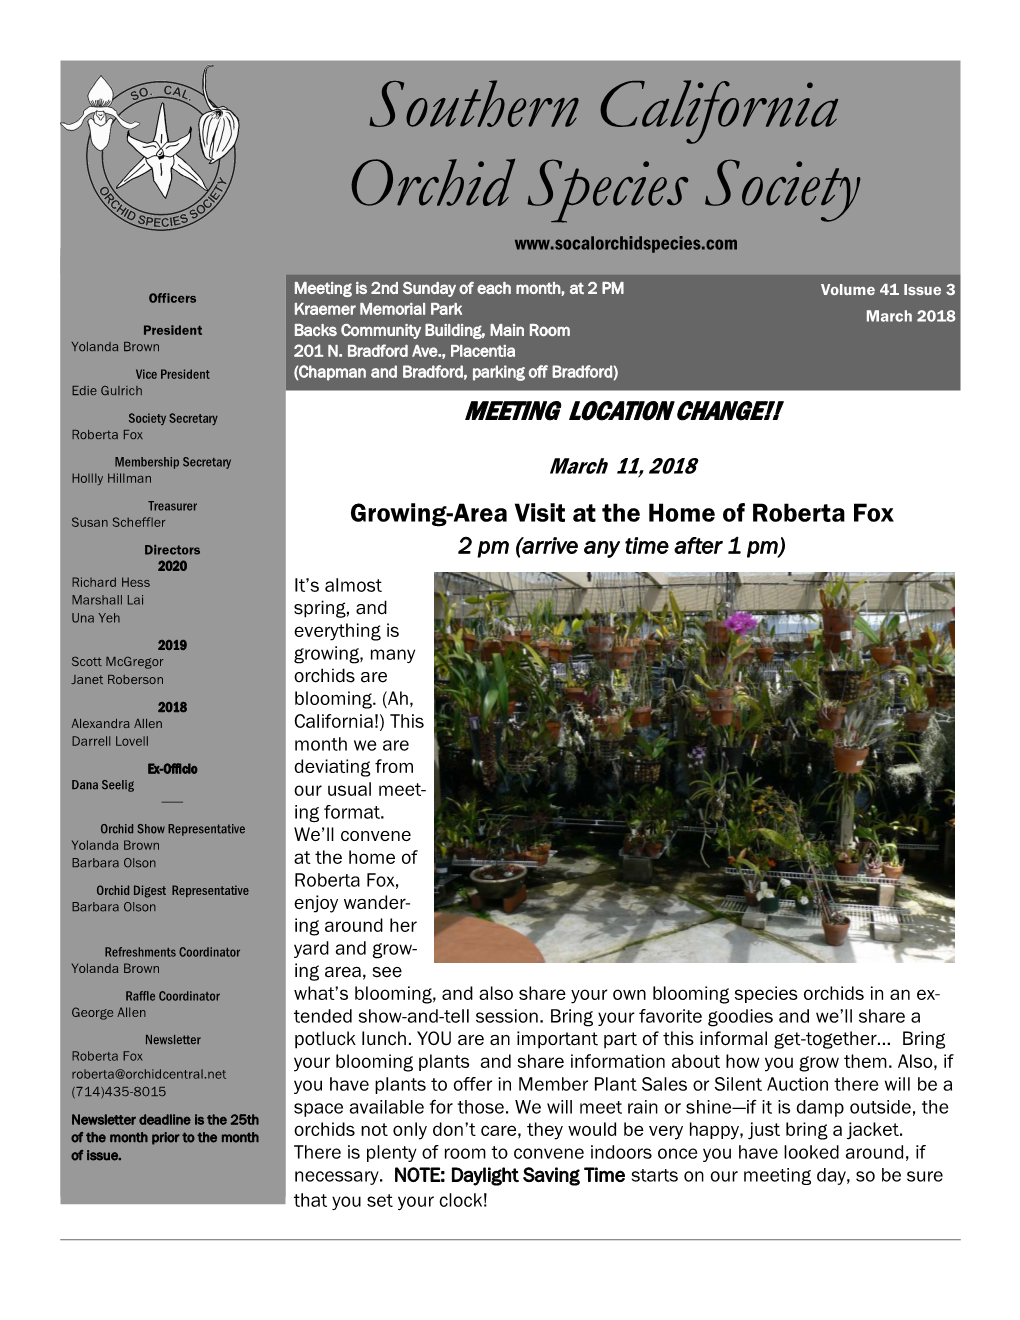 Southern California Orchid Species Society